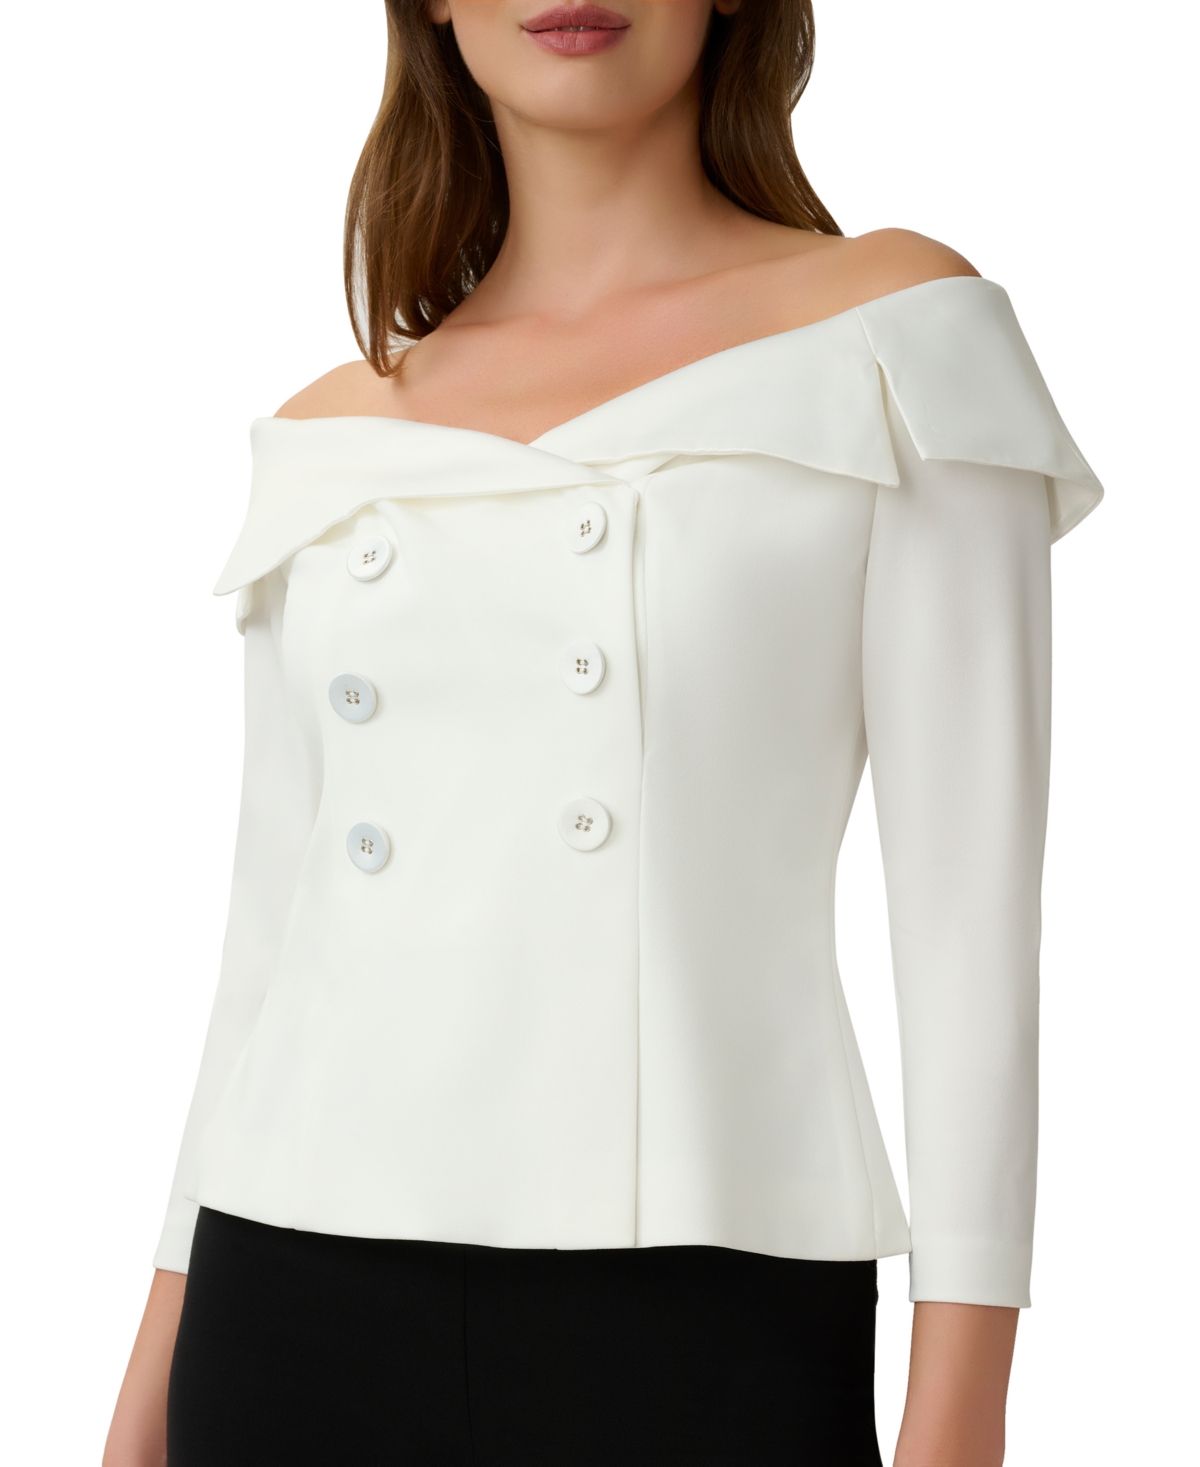  Adrianna Papell Women's Off-The-Shoulder Top